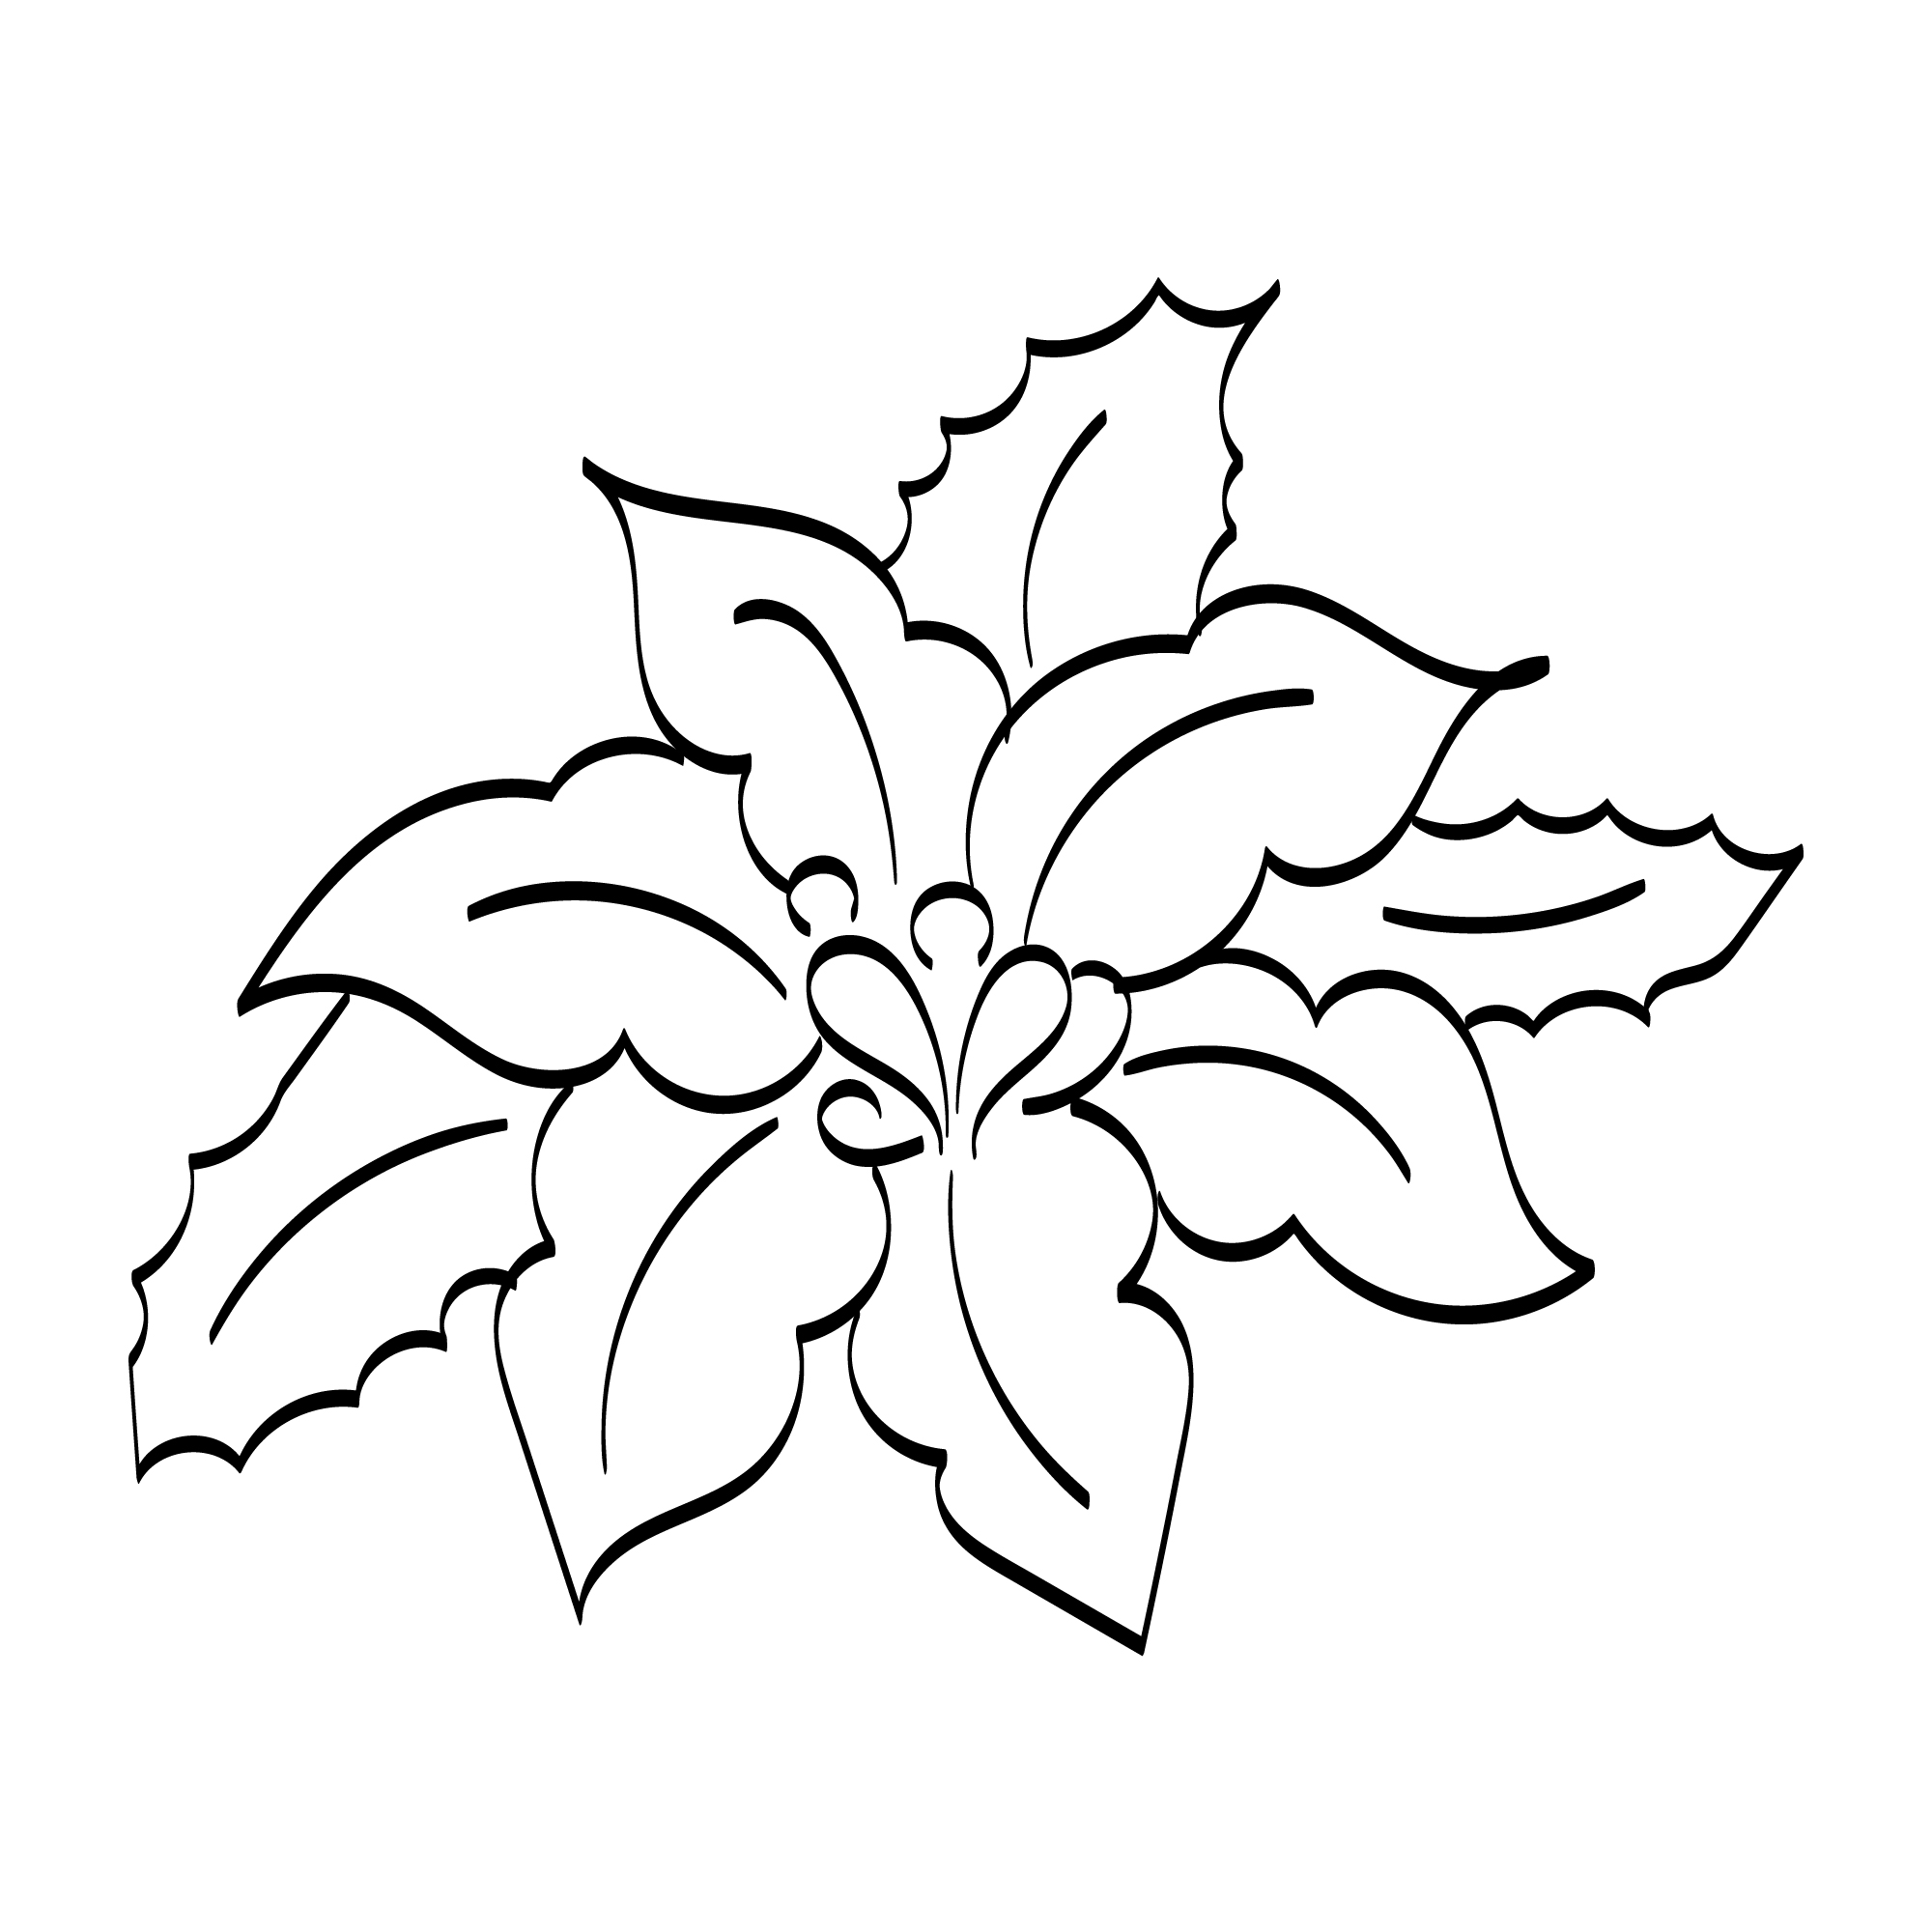 Hand Drawn Christmas Leaves Elements Graphics Design preview image.